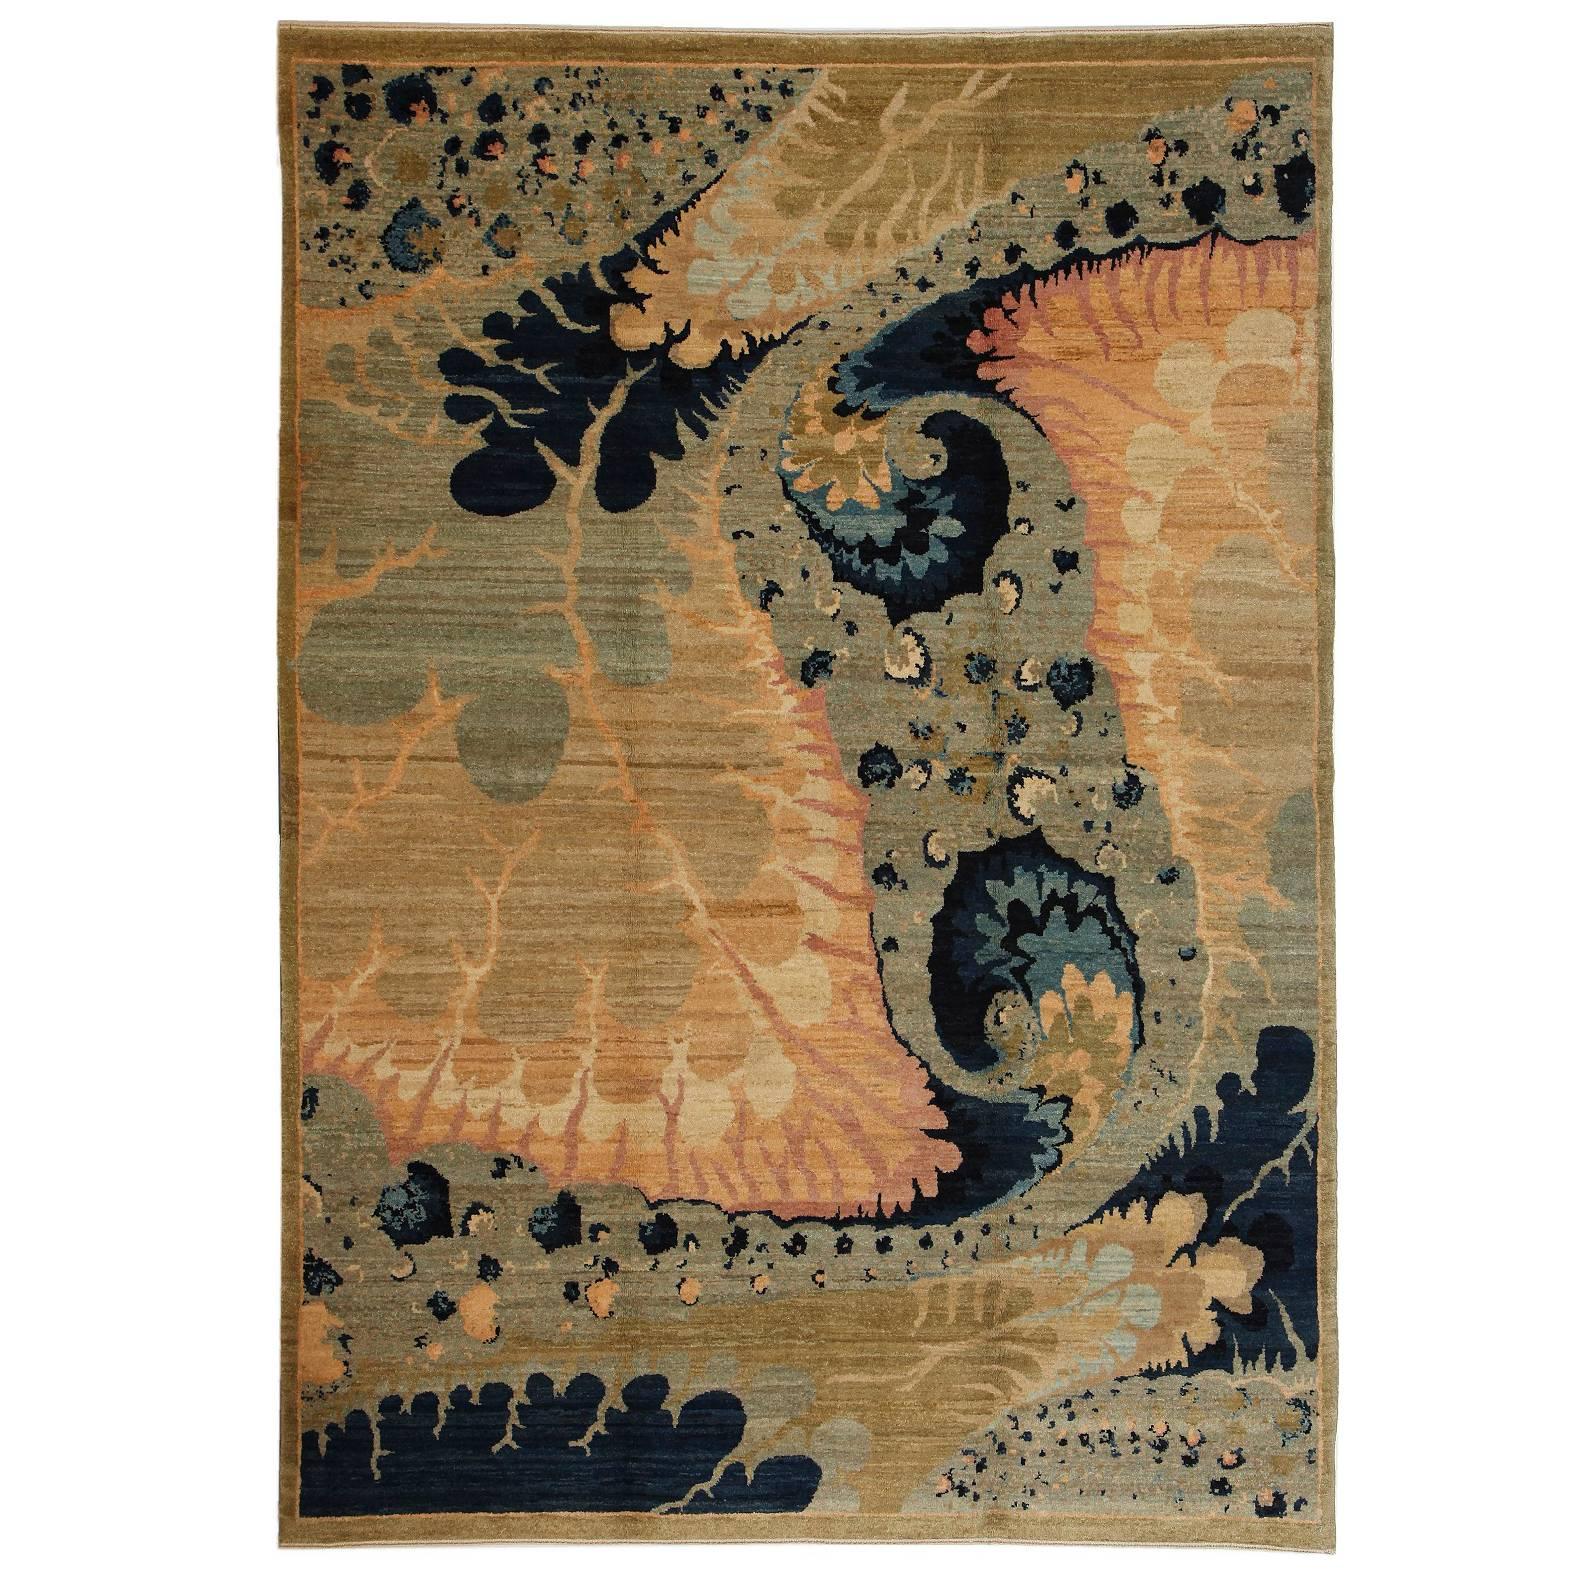 Orley Shabahang Signature Carpet in Handspun Wool and Organic Vegetable Dyes